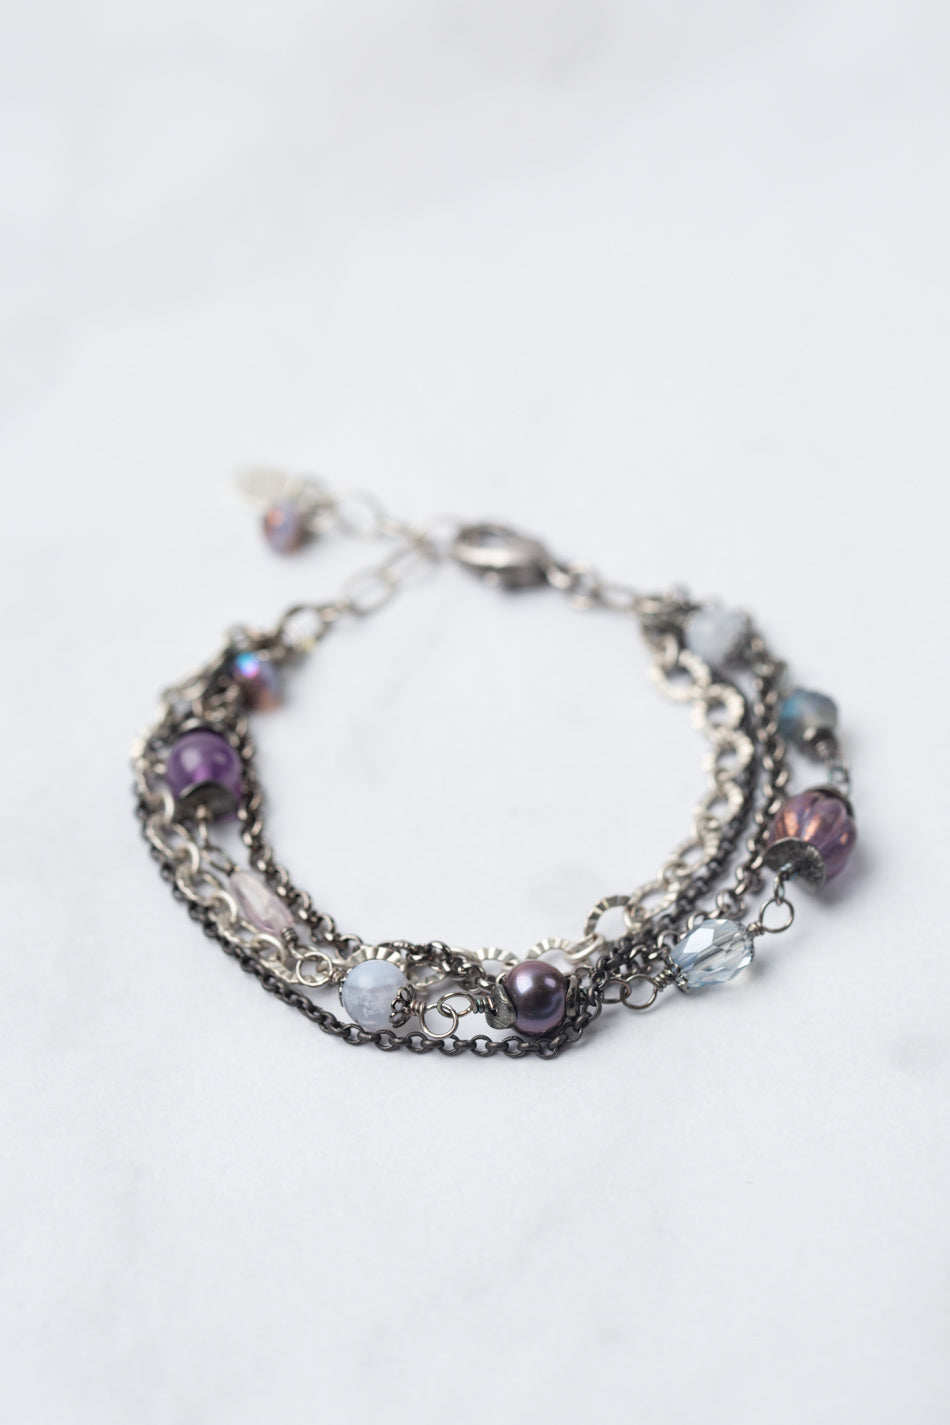 Reflections 7.5-8.5" Pearl, Amethyst, Blue Lace Agate Multistrand Bracelet